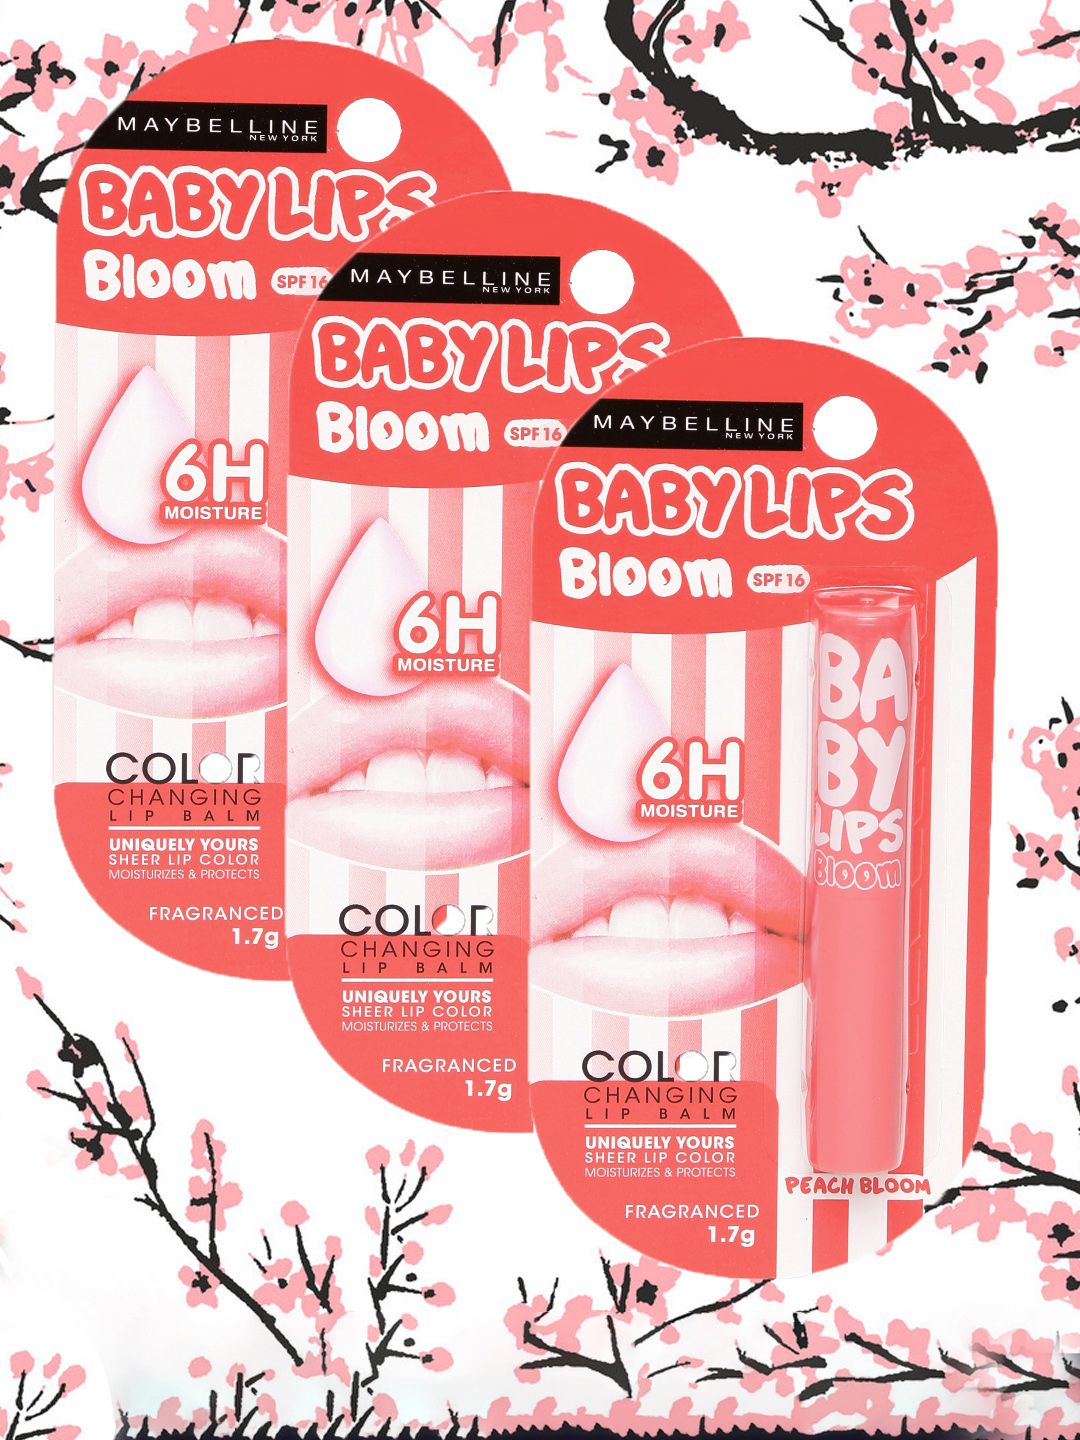 Maybelline Set of 3 Baby Lips Bloom Color Changing Lip Balm - Peach Bloom Price in India